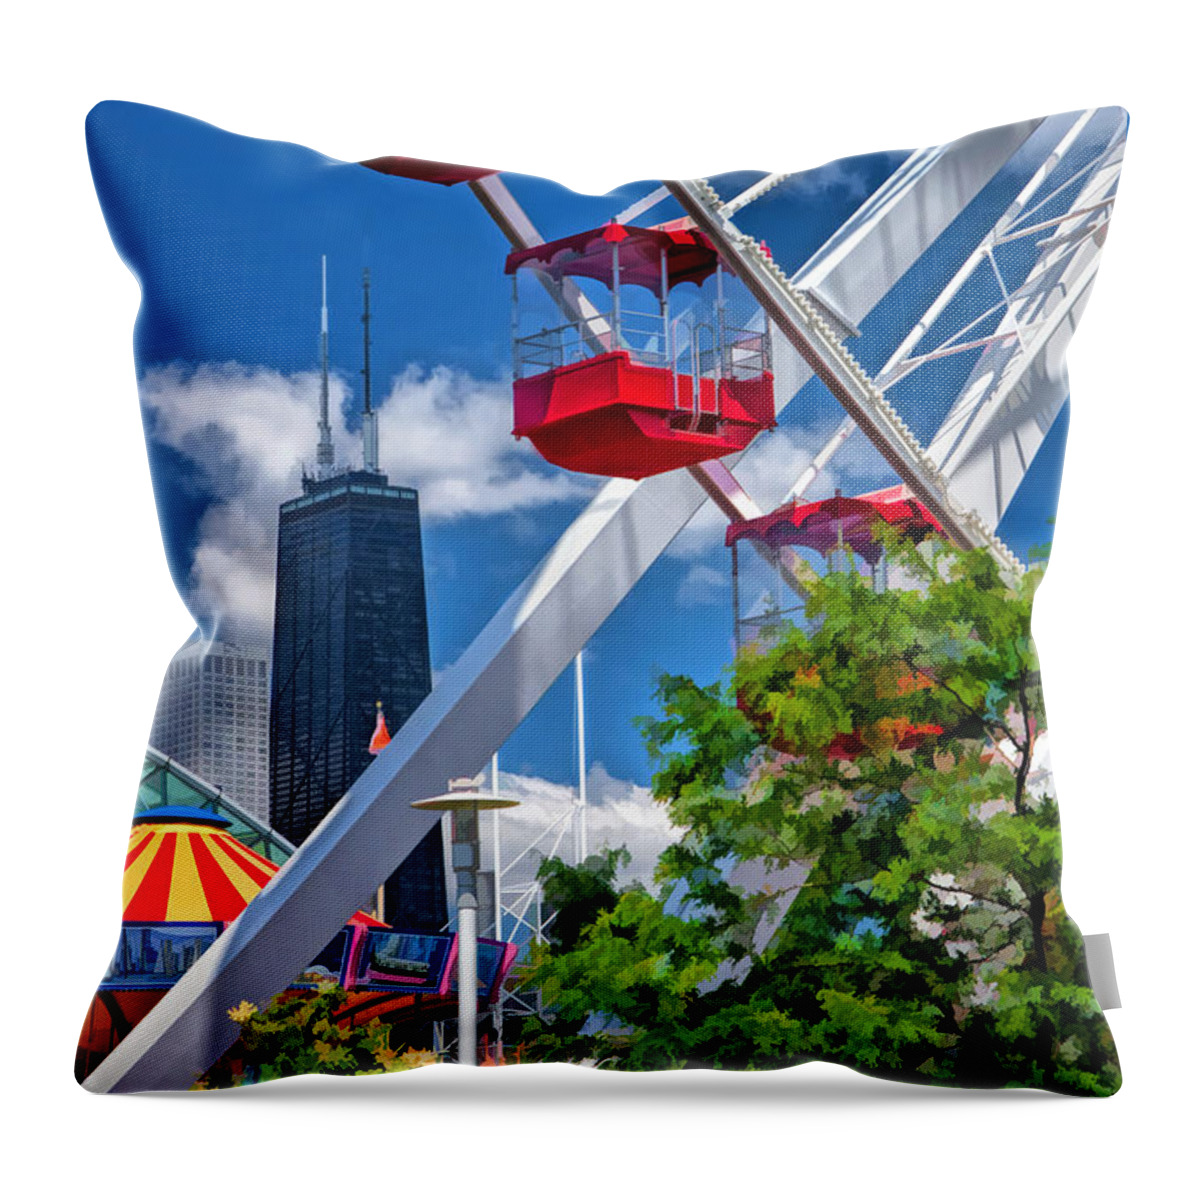 Chicago Throw Pillow featuring the painting Chicago Navy Pier Ferris Wheel by Christopher Arndt